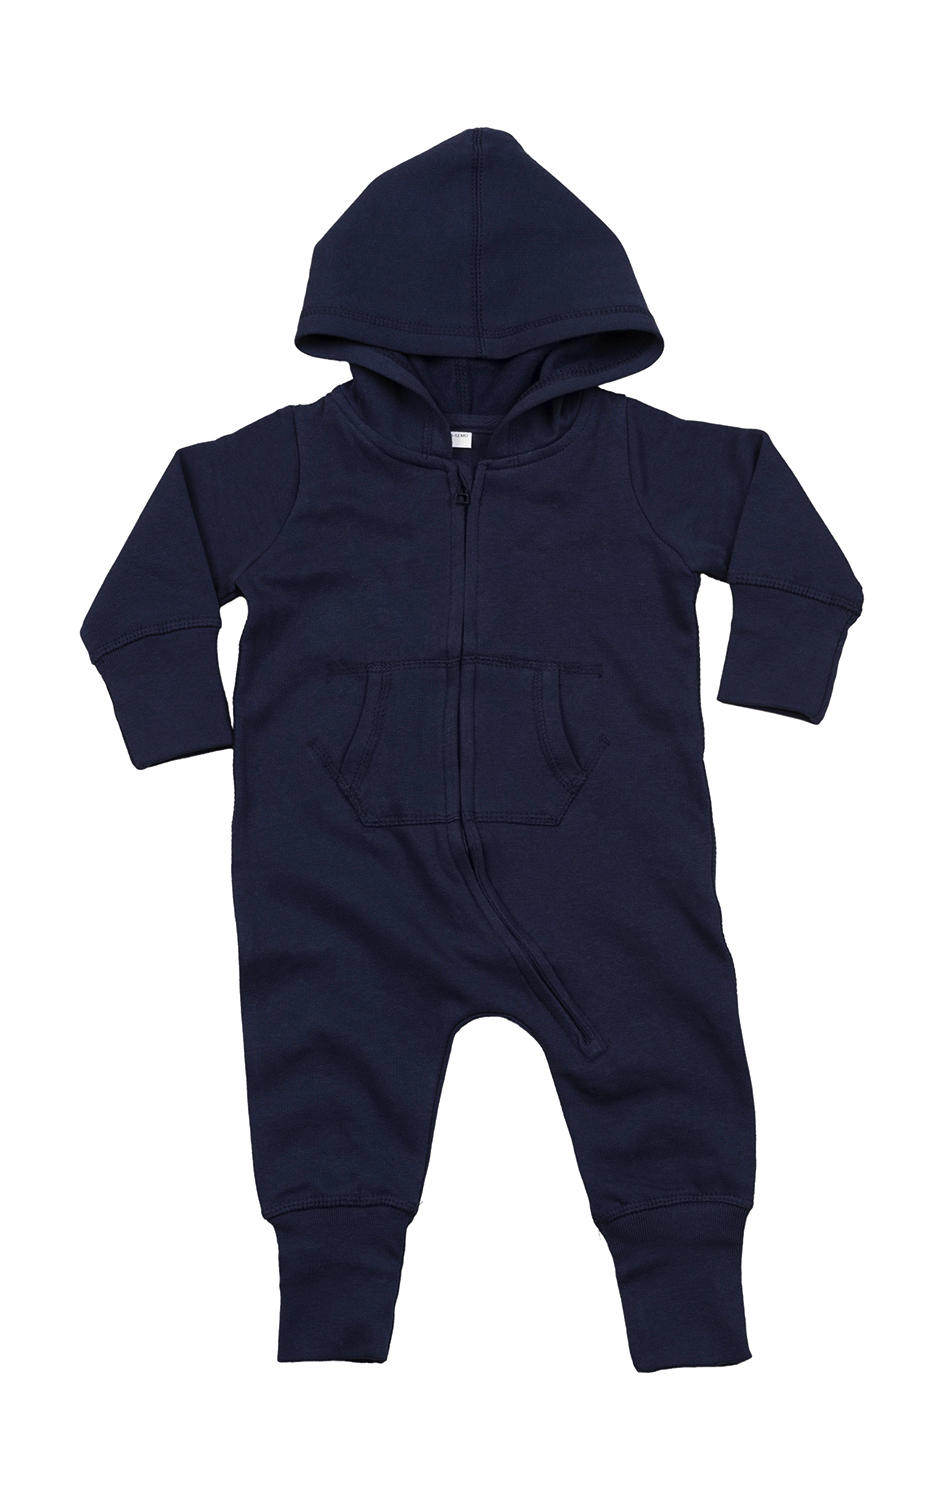  Baby All-in-One in Farbe Nautical Navy